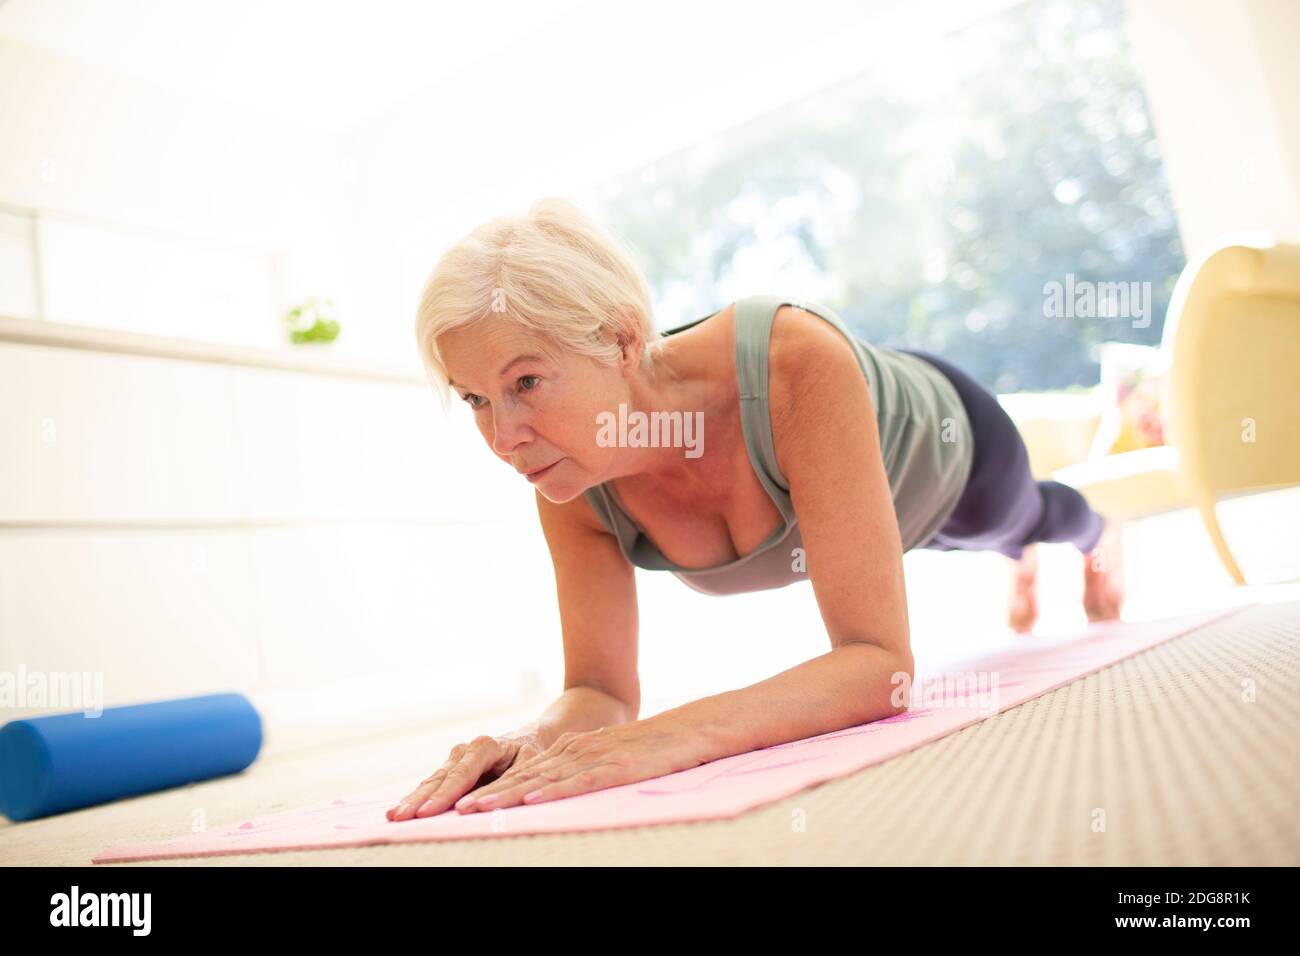 Focused senior woman practicing plank exercise on yoga mat at home Stock Photo